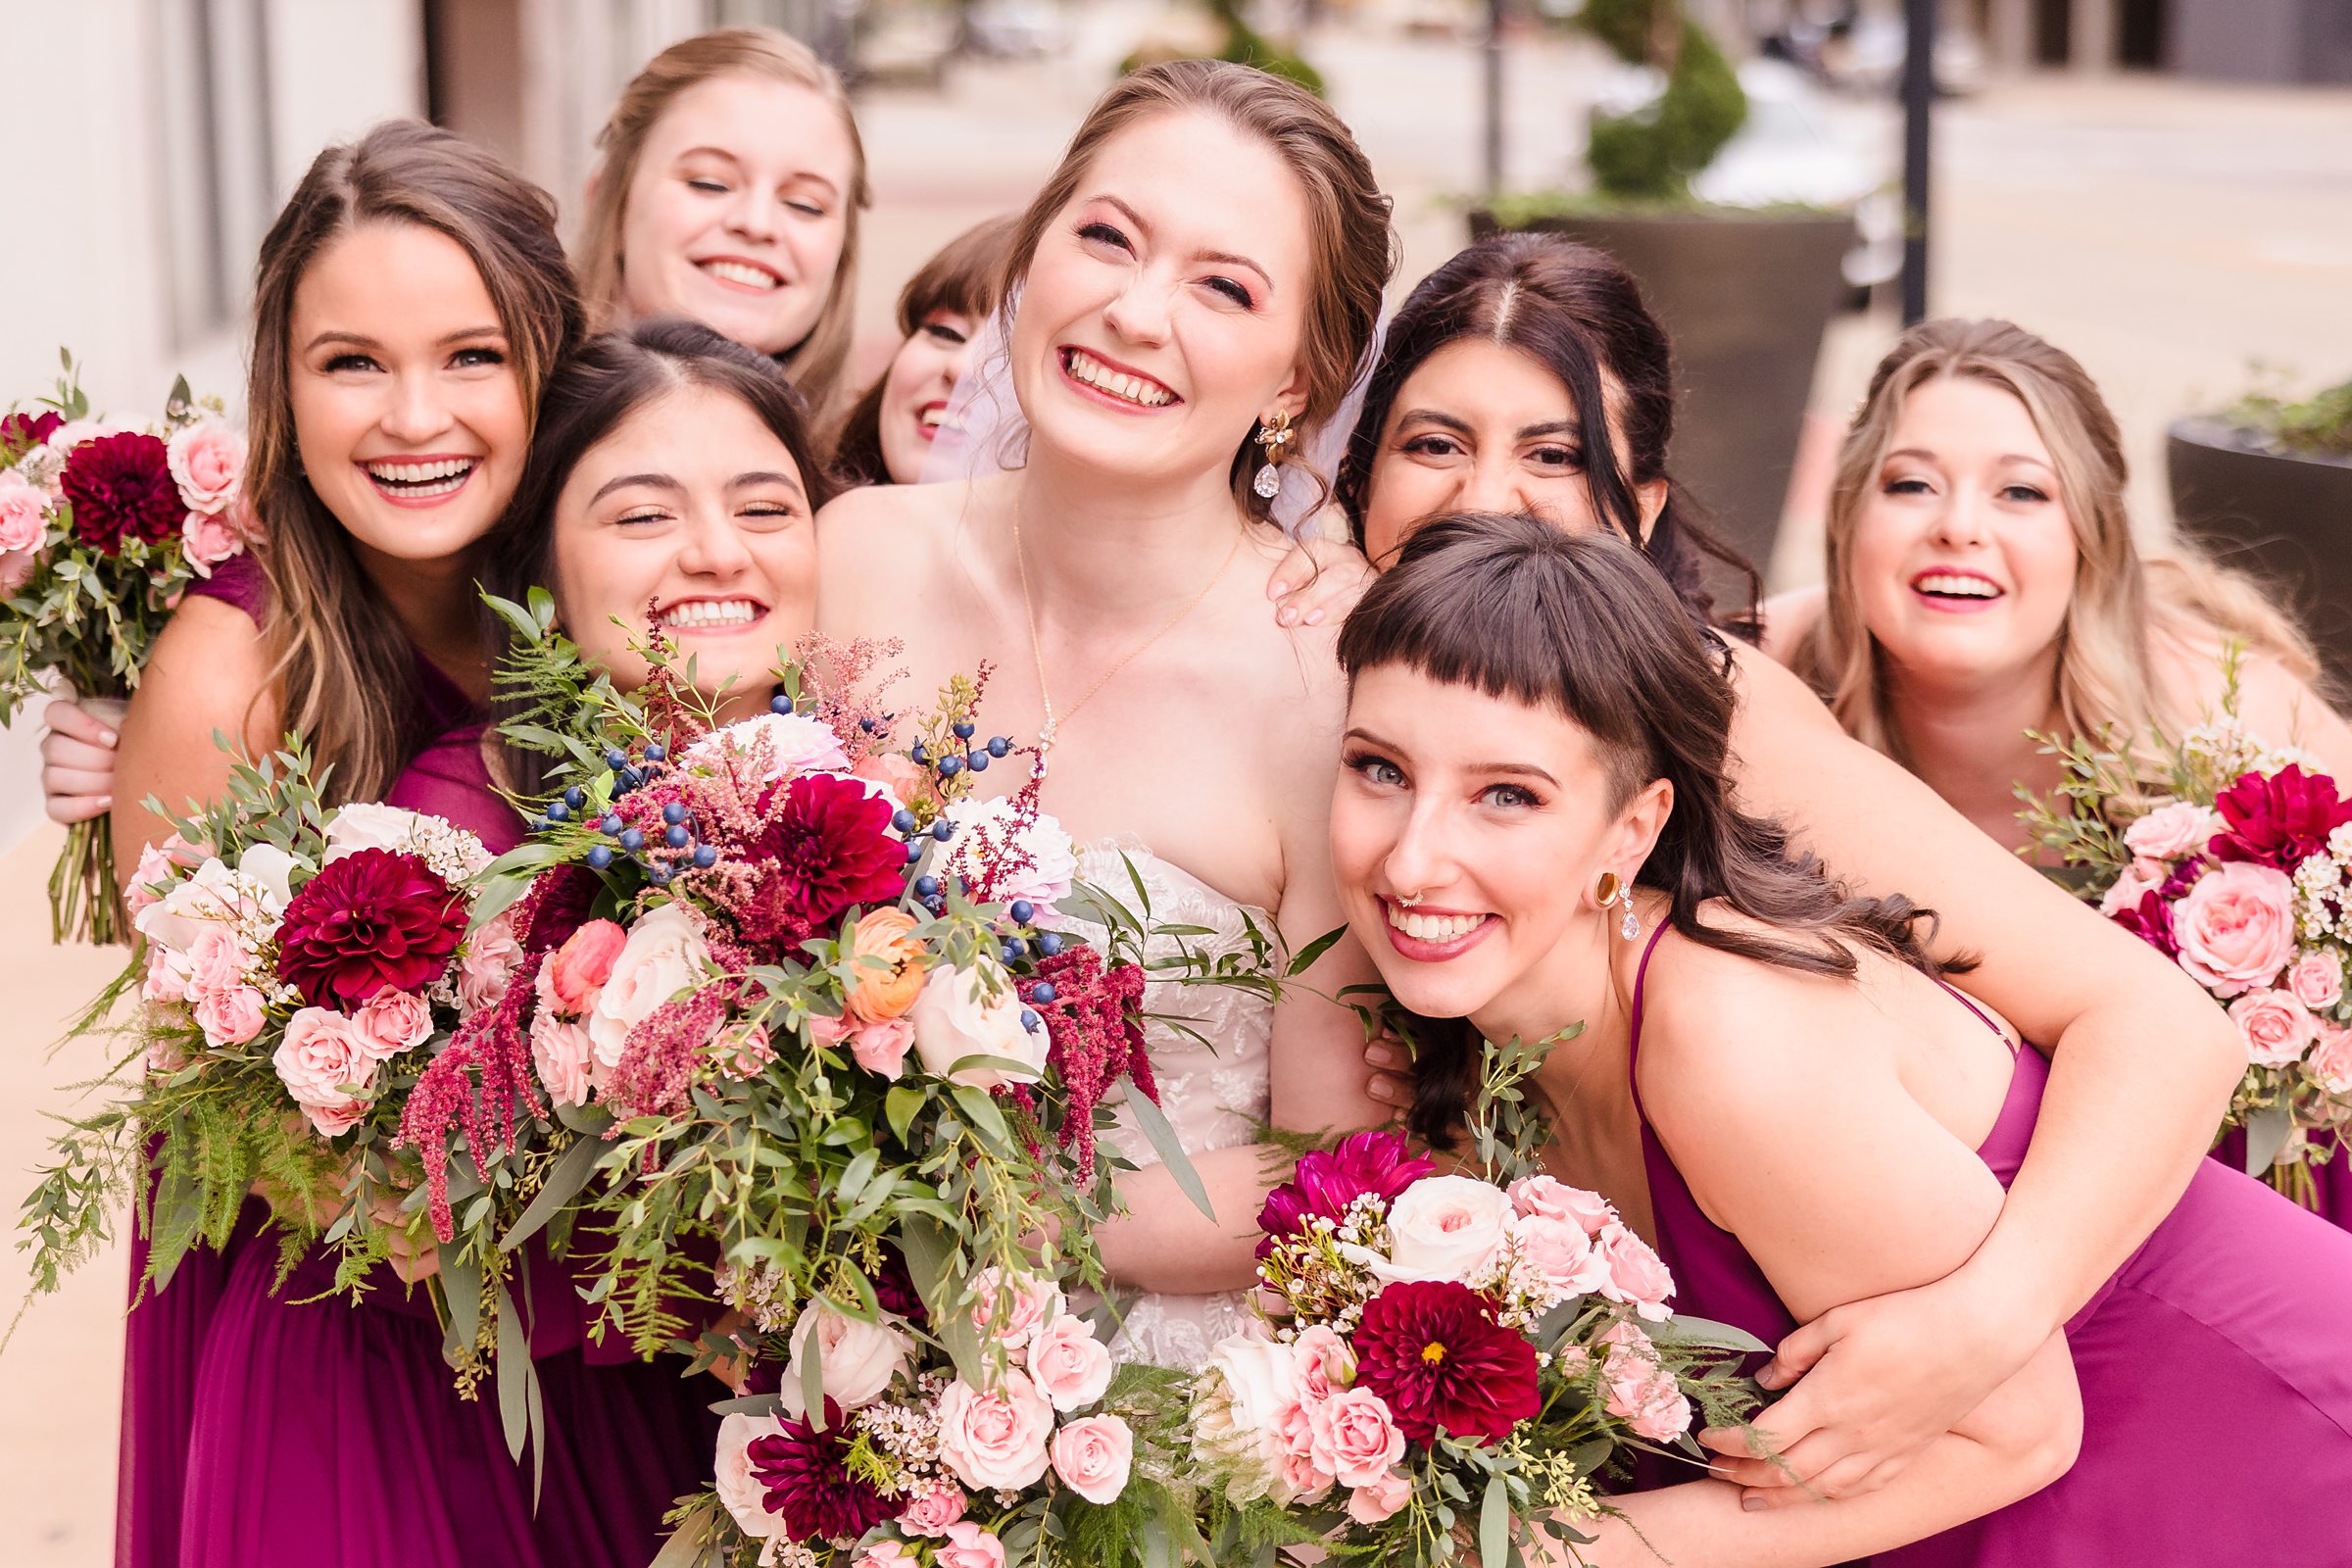 Bride celebrates with her bridesmaids during her wedding at the Hotel Pere Marquette in Peoria, Illinois.